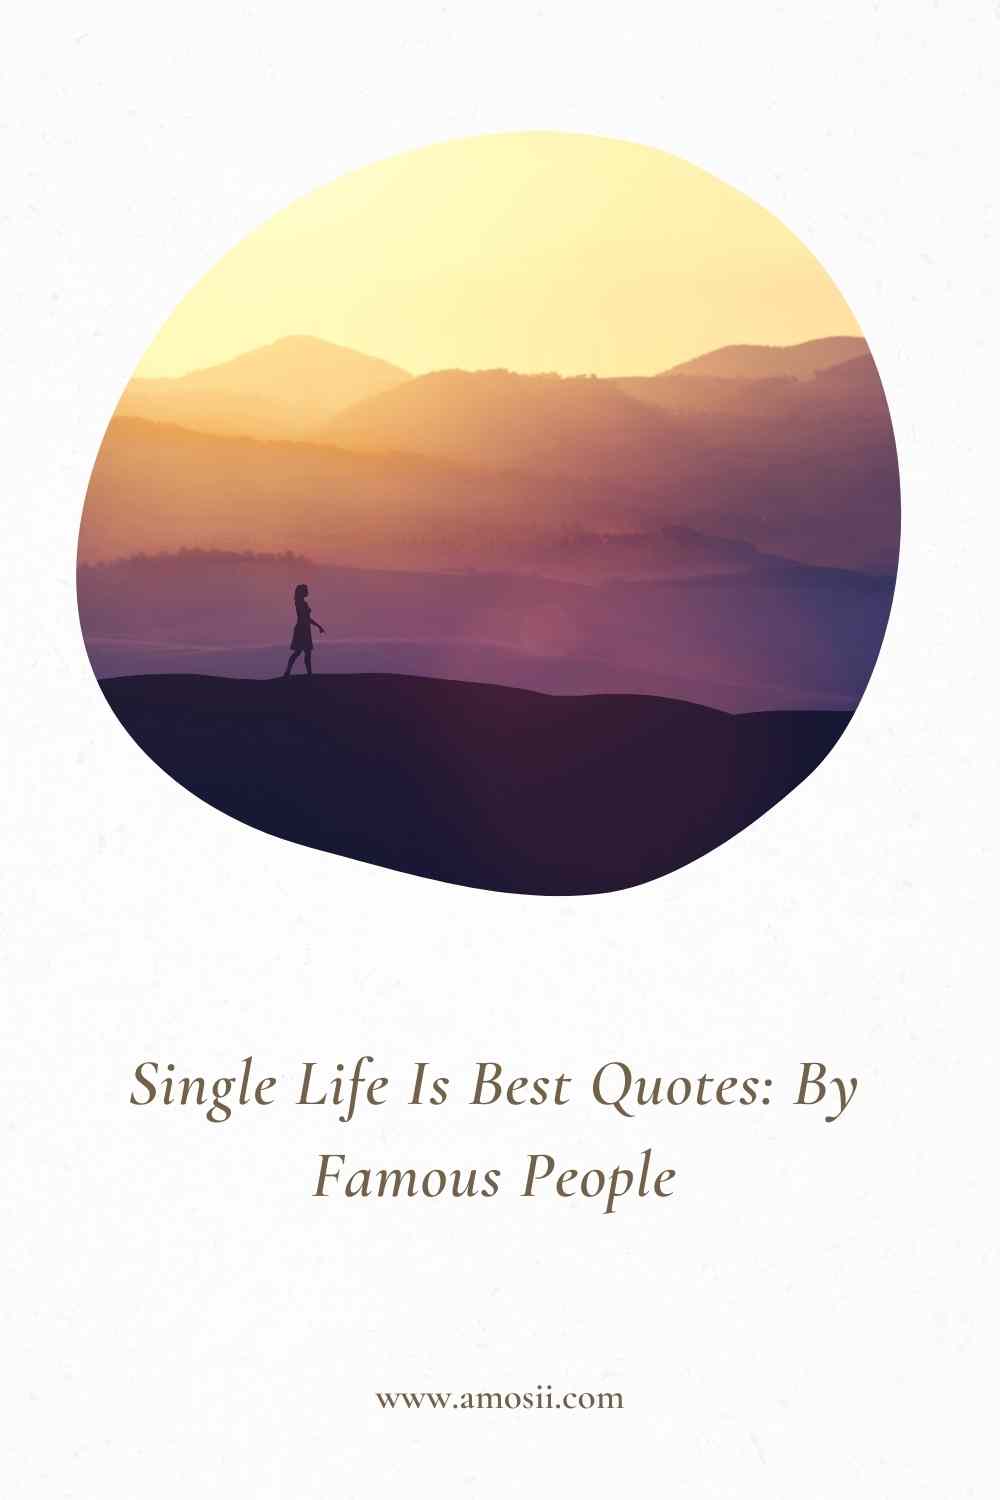 Single Life Is Best Quotes: By Famous People